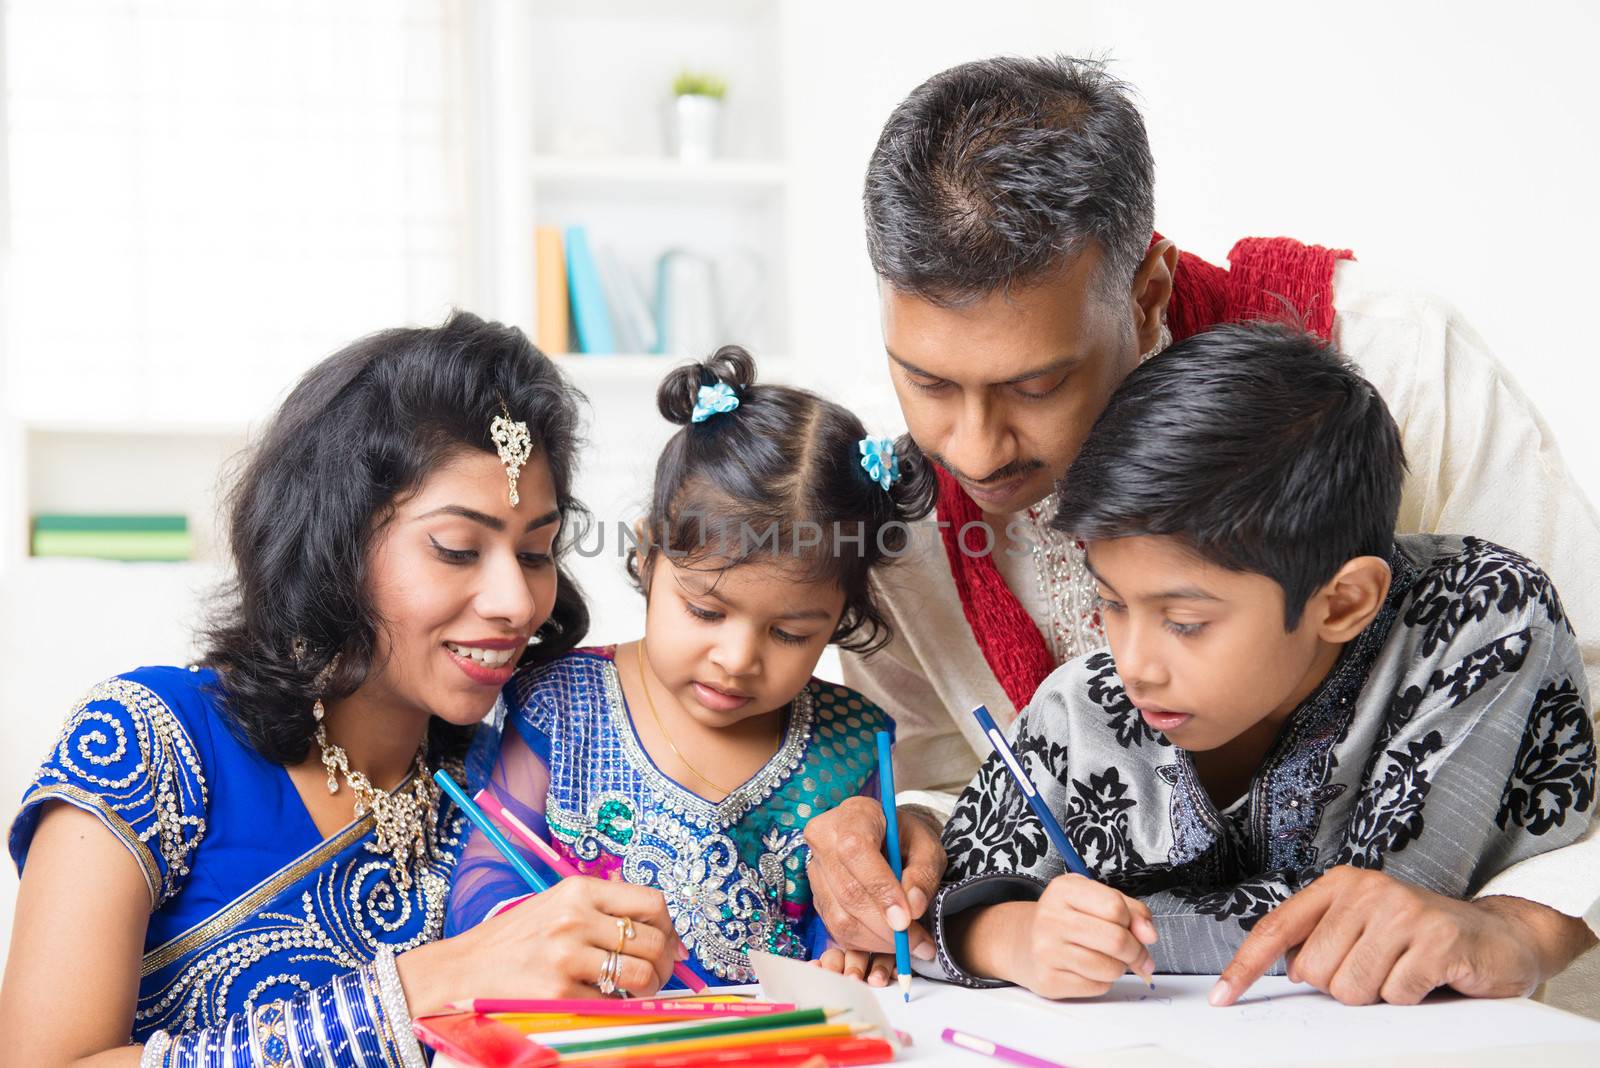 Asian Indian family drawing and painting picture at home. India family lifestyle. Happy parents and children having fun.